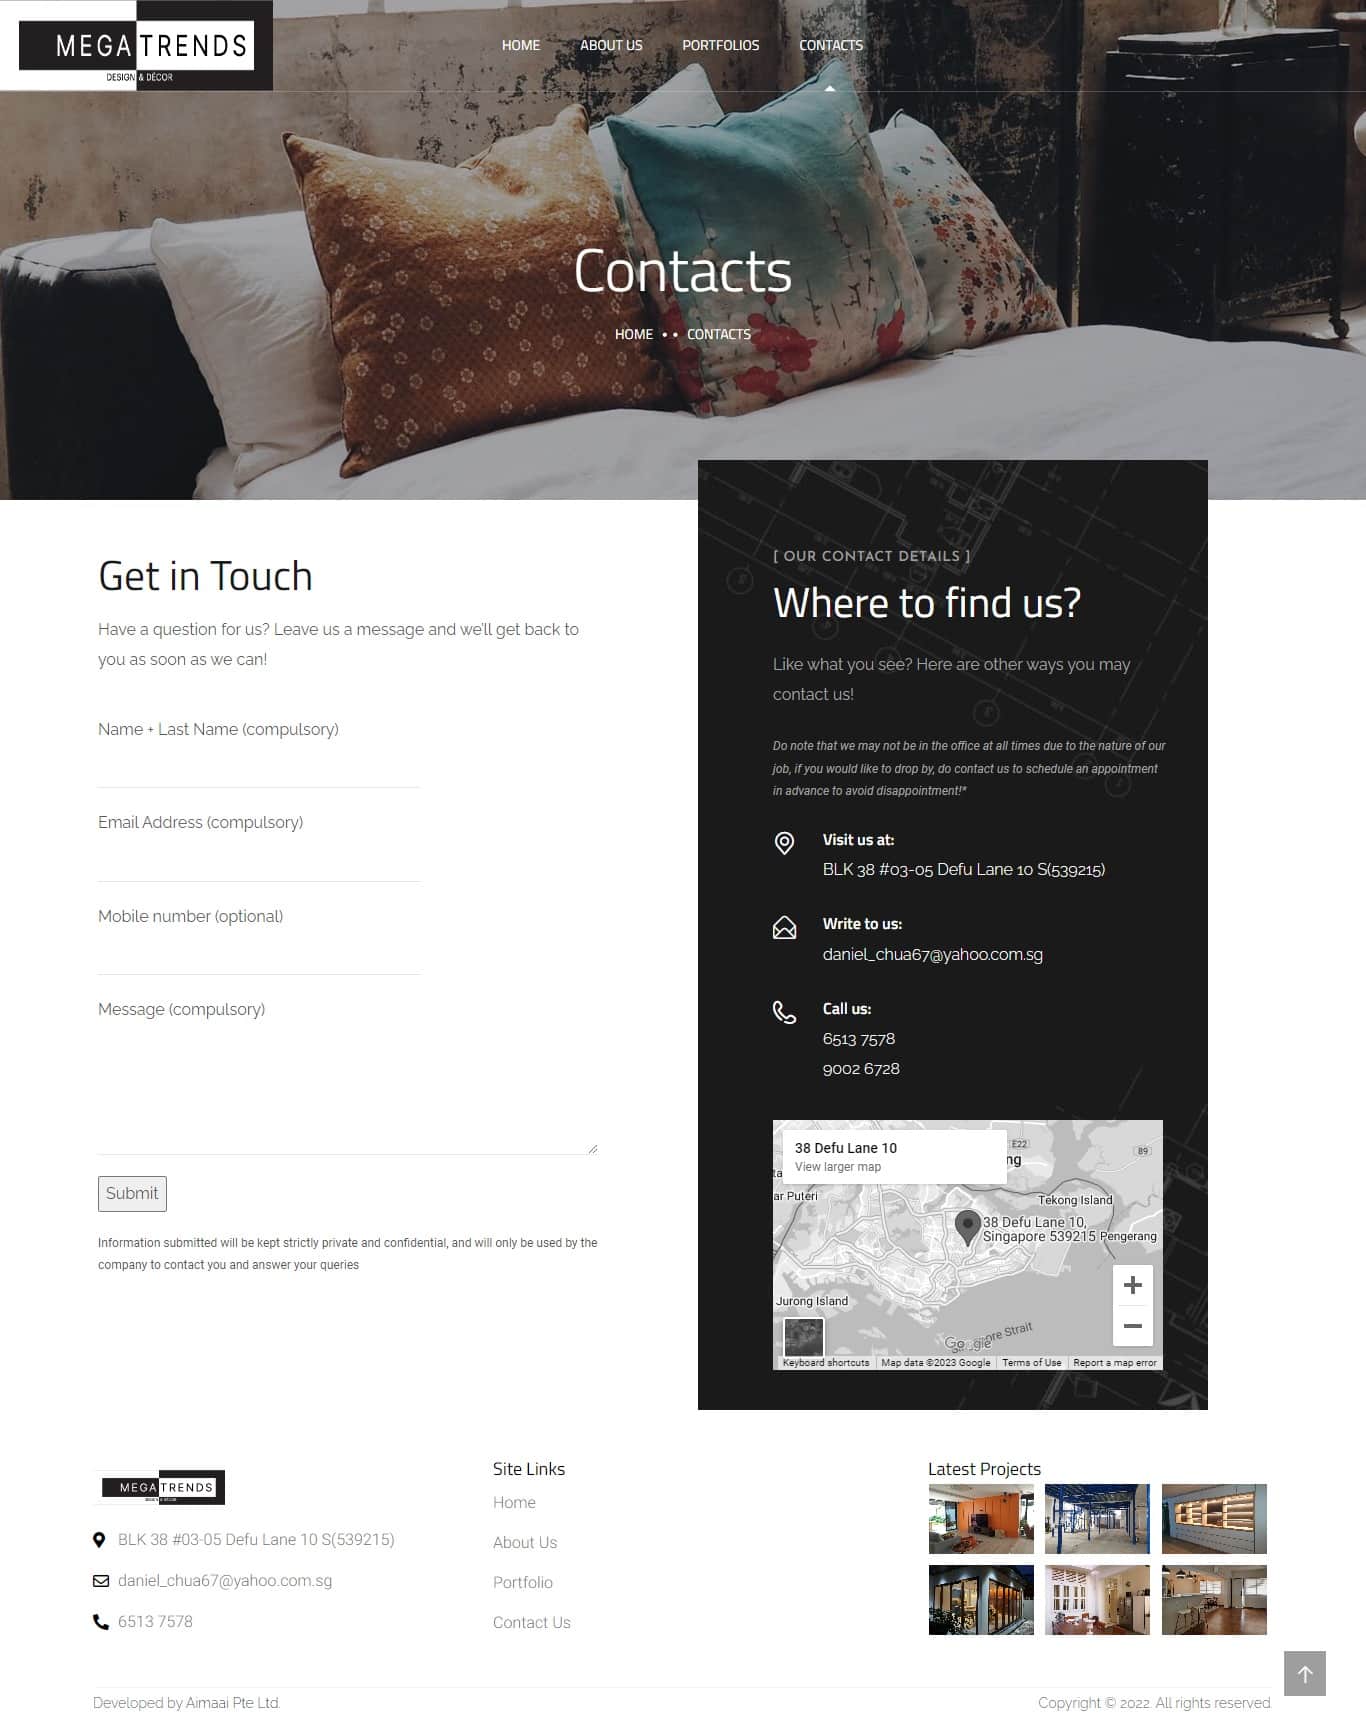 A black and white template-based web development for a hotel.